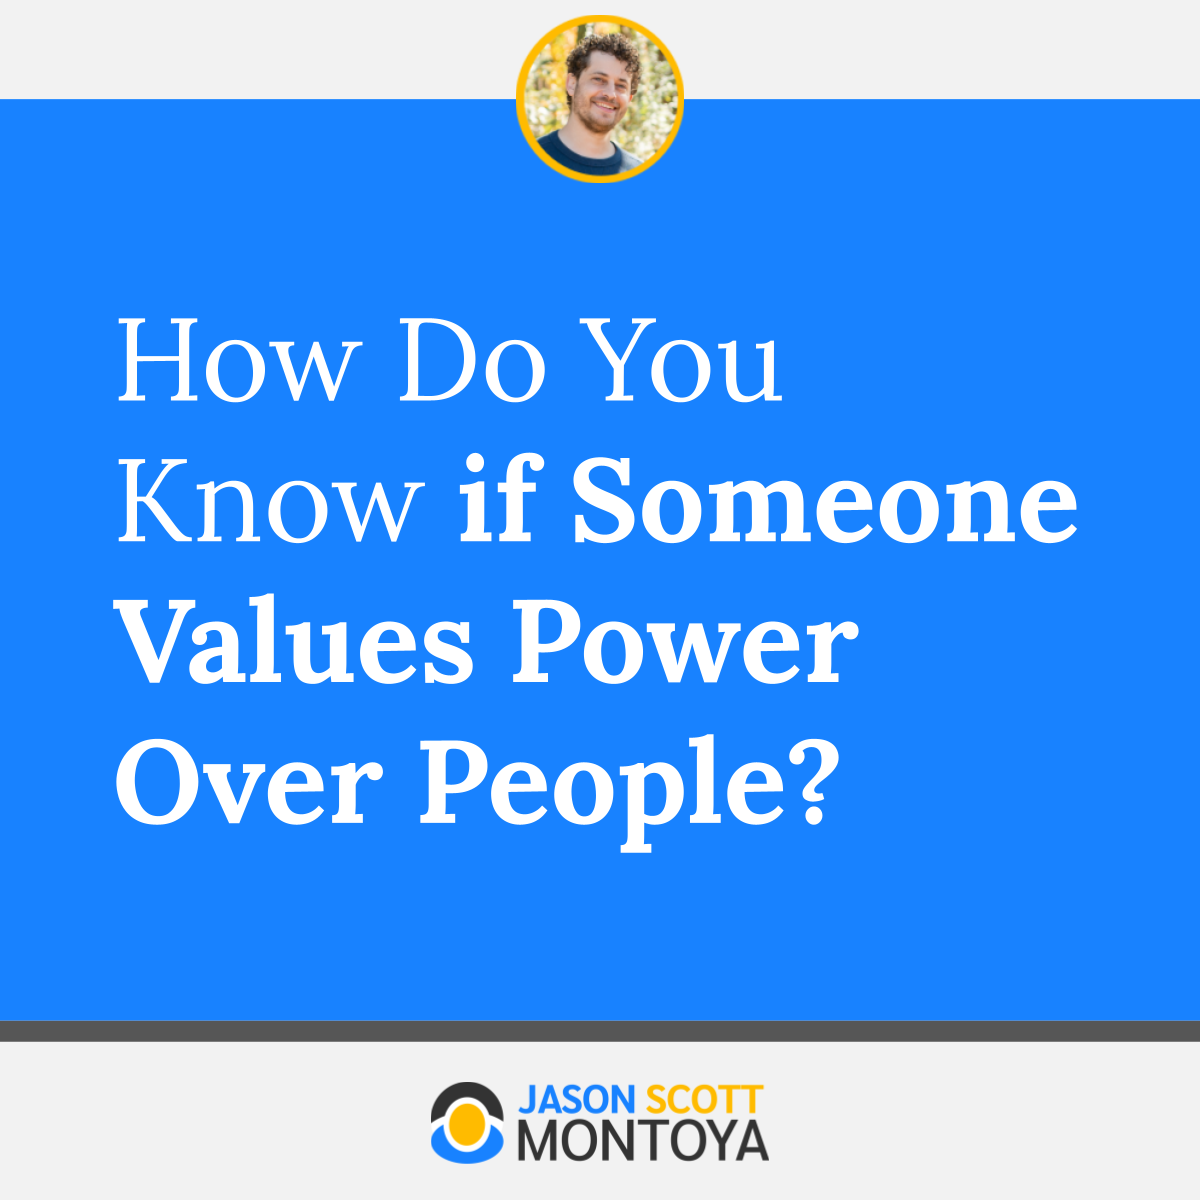 How Do You Know if Someone Values Power Over People?